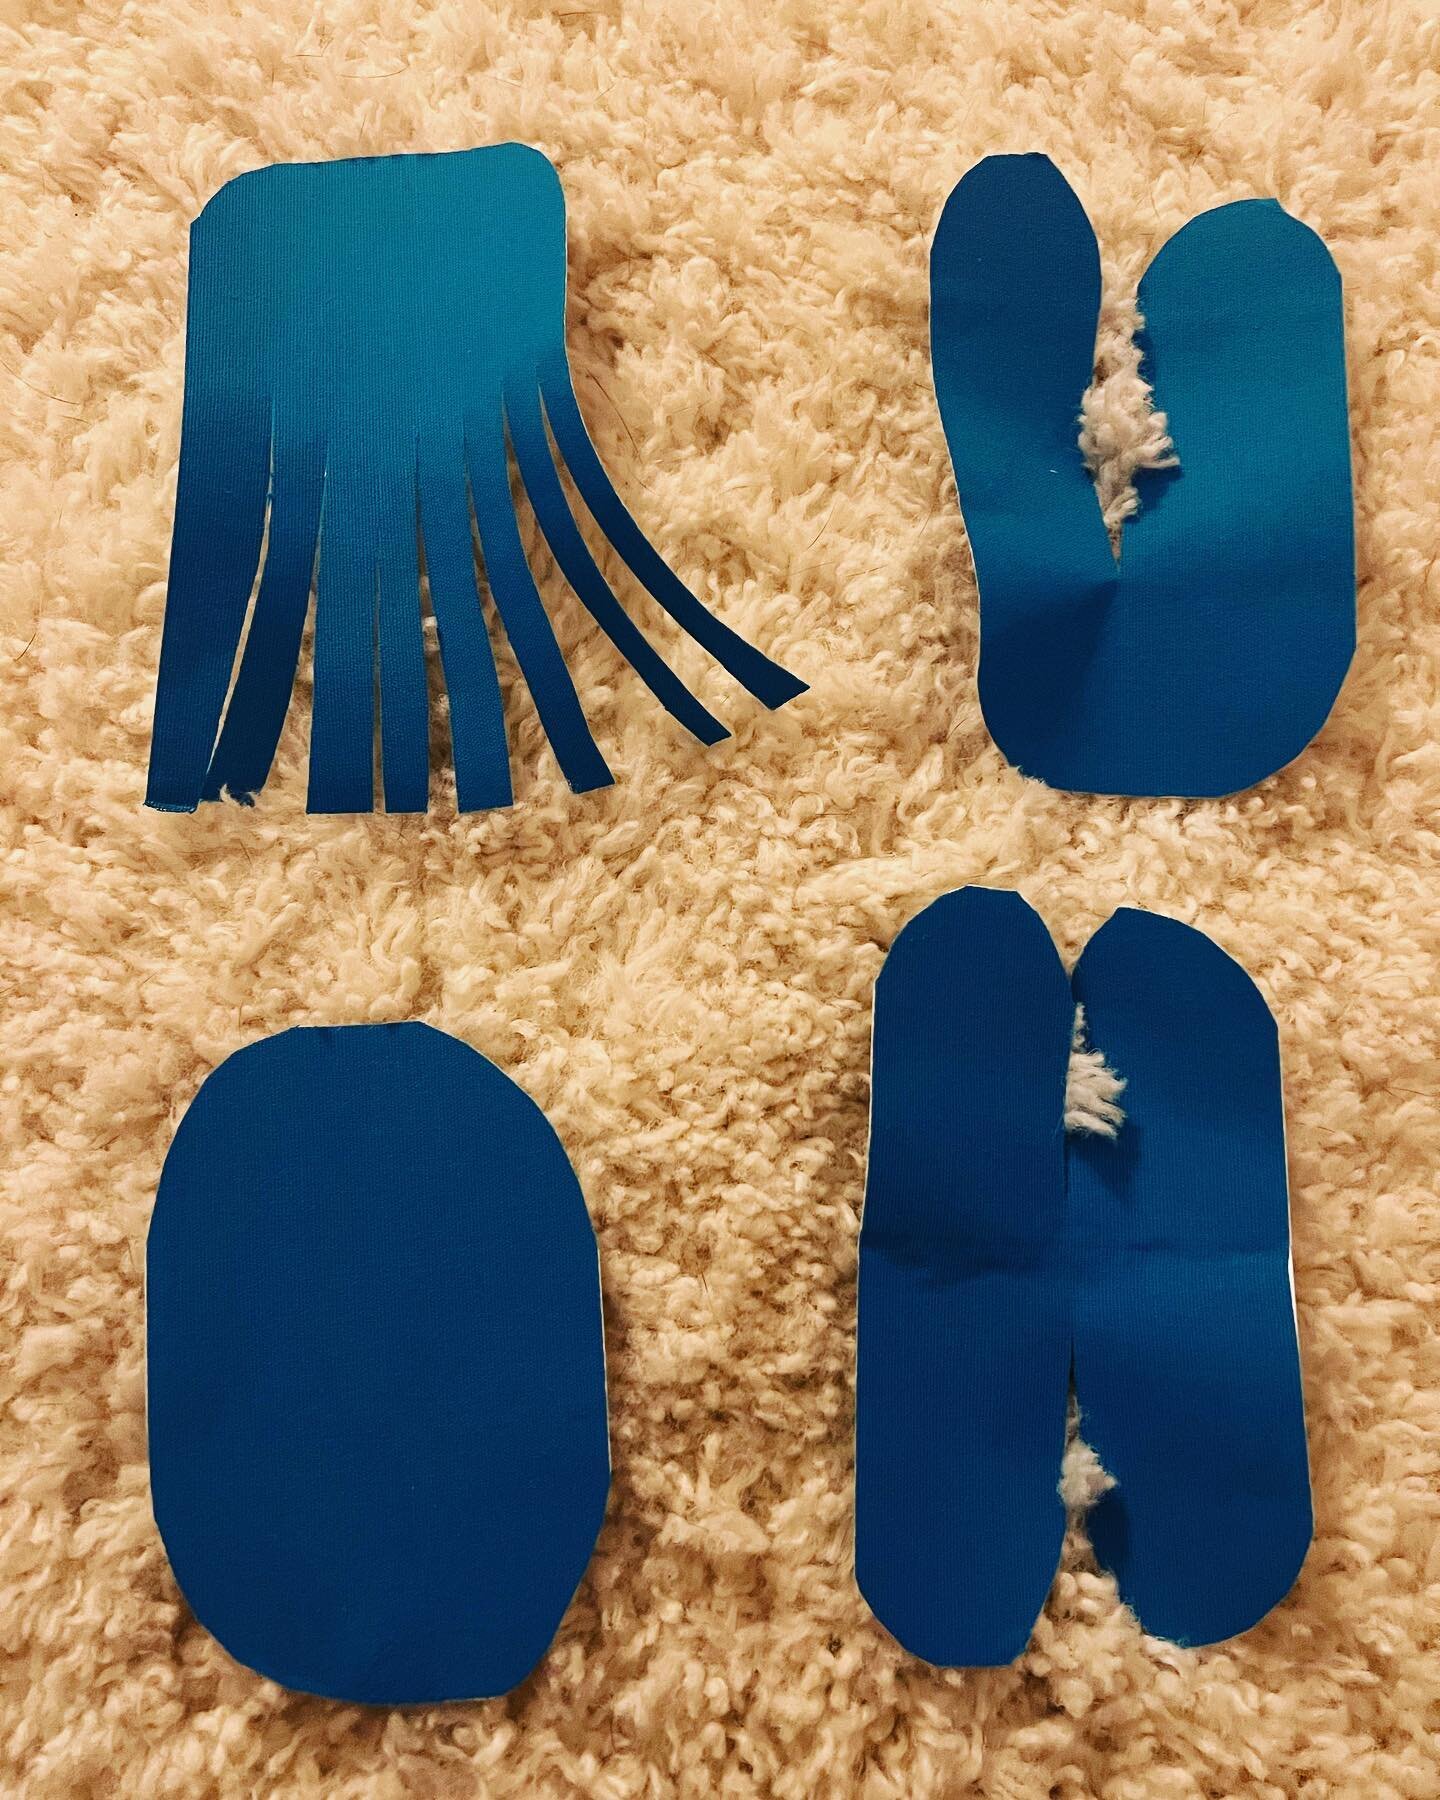 I started my Kinesiology Tape course and today we are learning how to cut the different types of tape and conditions each type of taping can support. So far I learned that there are 4 types of cuts that can support the body. The Fan (top left), the Y